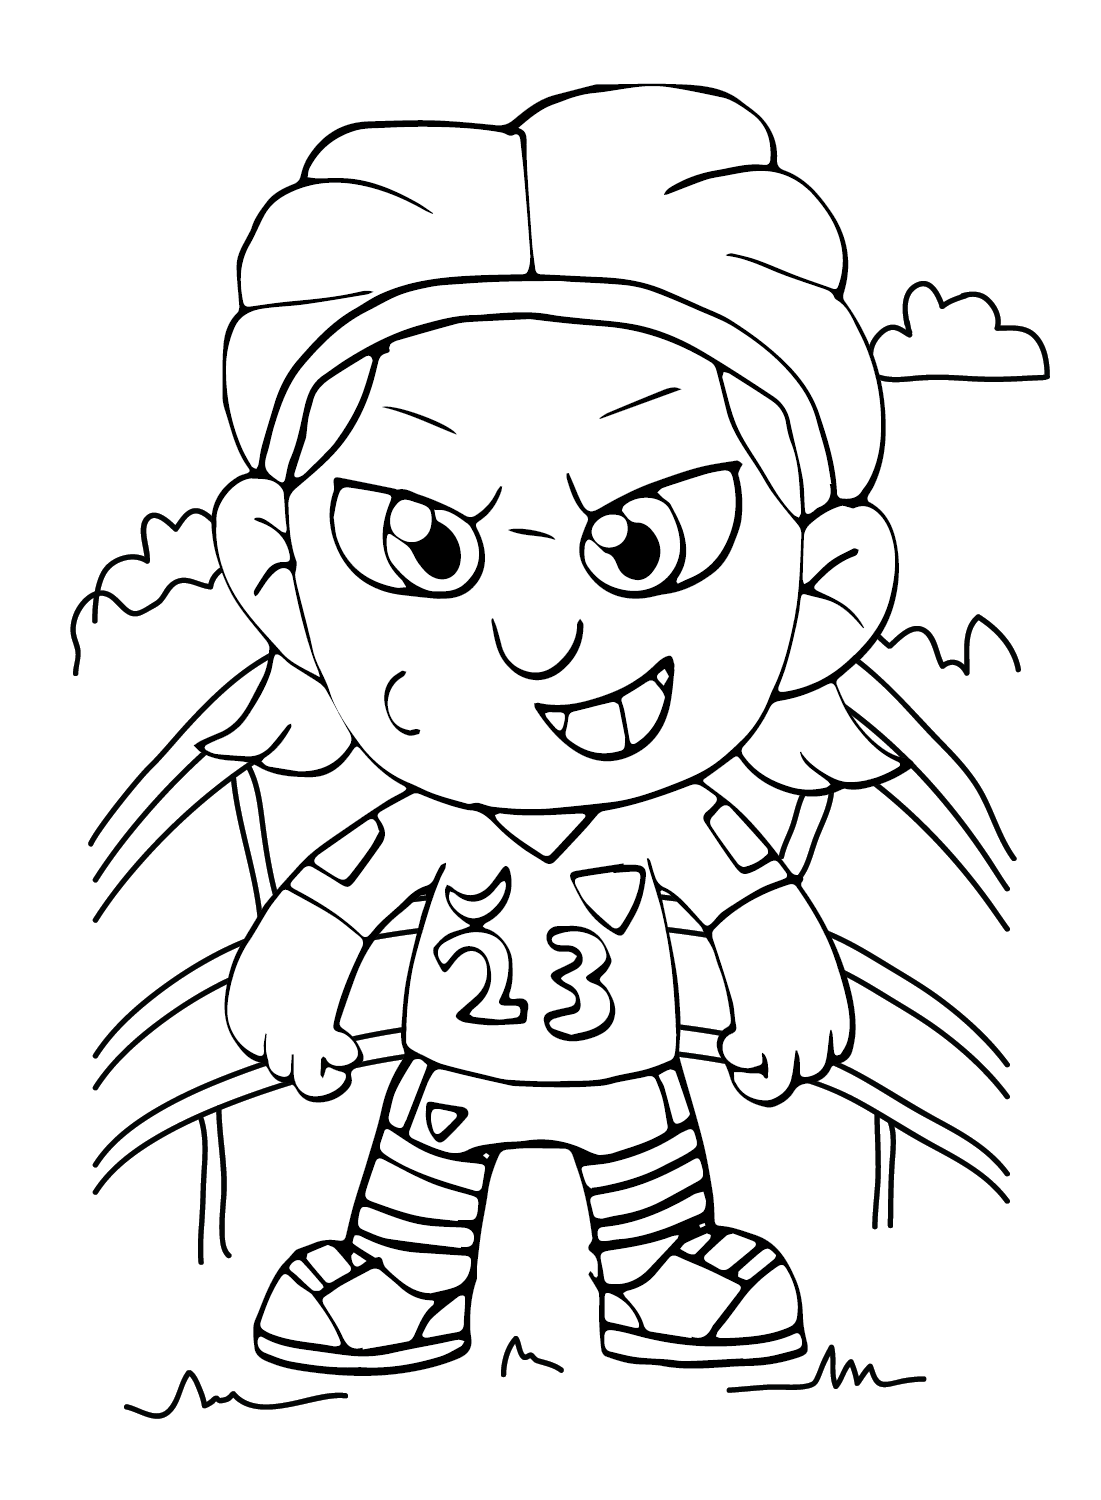 Chibi Erling Haaland Coloring Pages